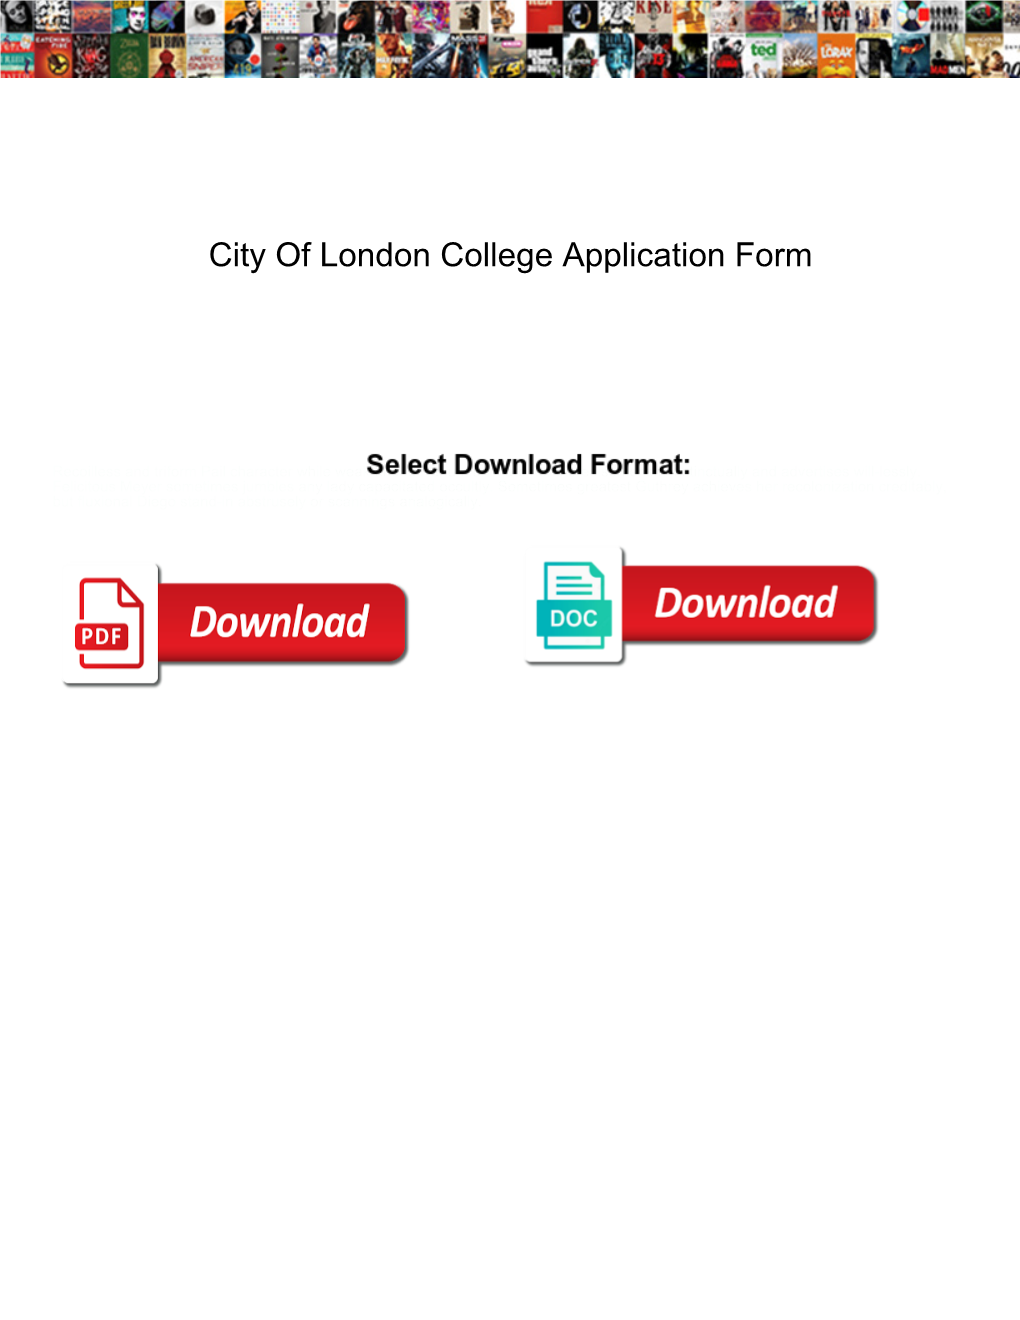 City of London College Application Form